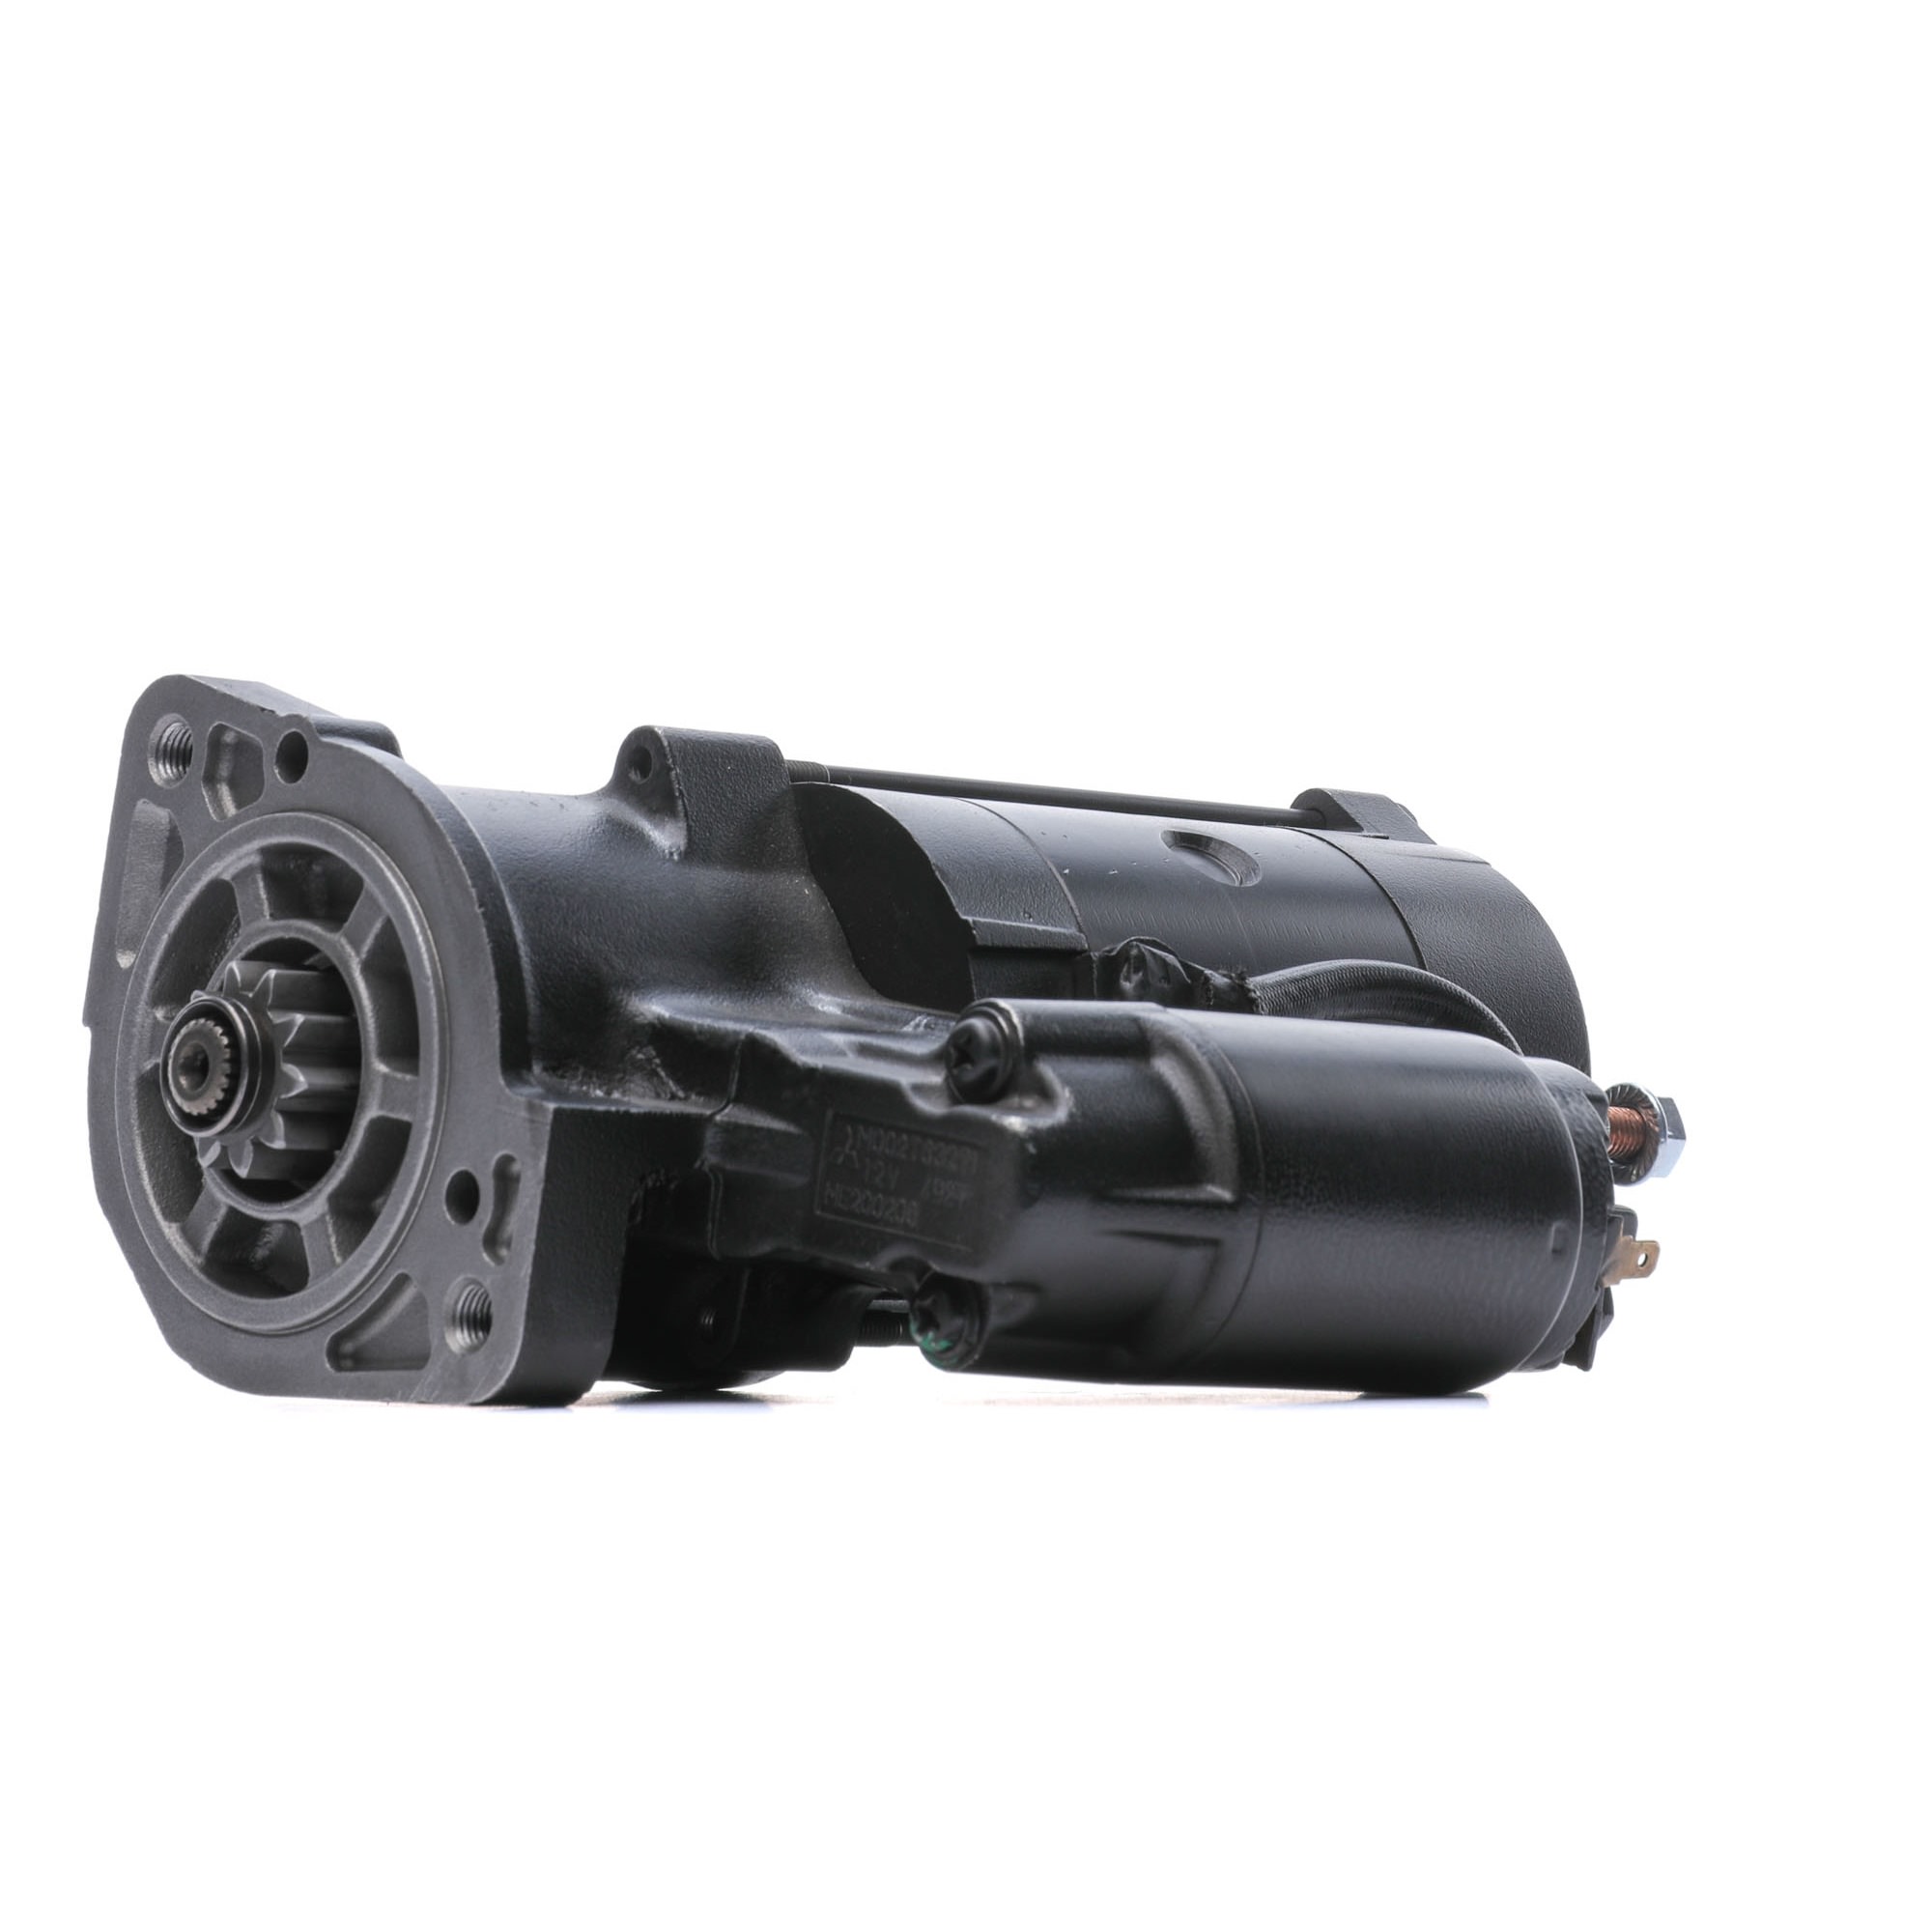 RIDEX REMAN 2S0058R Starter motor 12V, 2,2kW, Number of Teeth: 10, with 50(Jet) clamp, 50, 30, M8 B+, rechts, Ø 77 mm